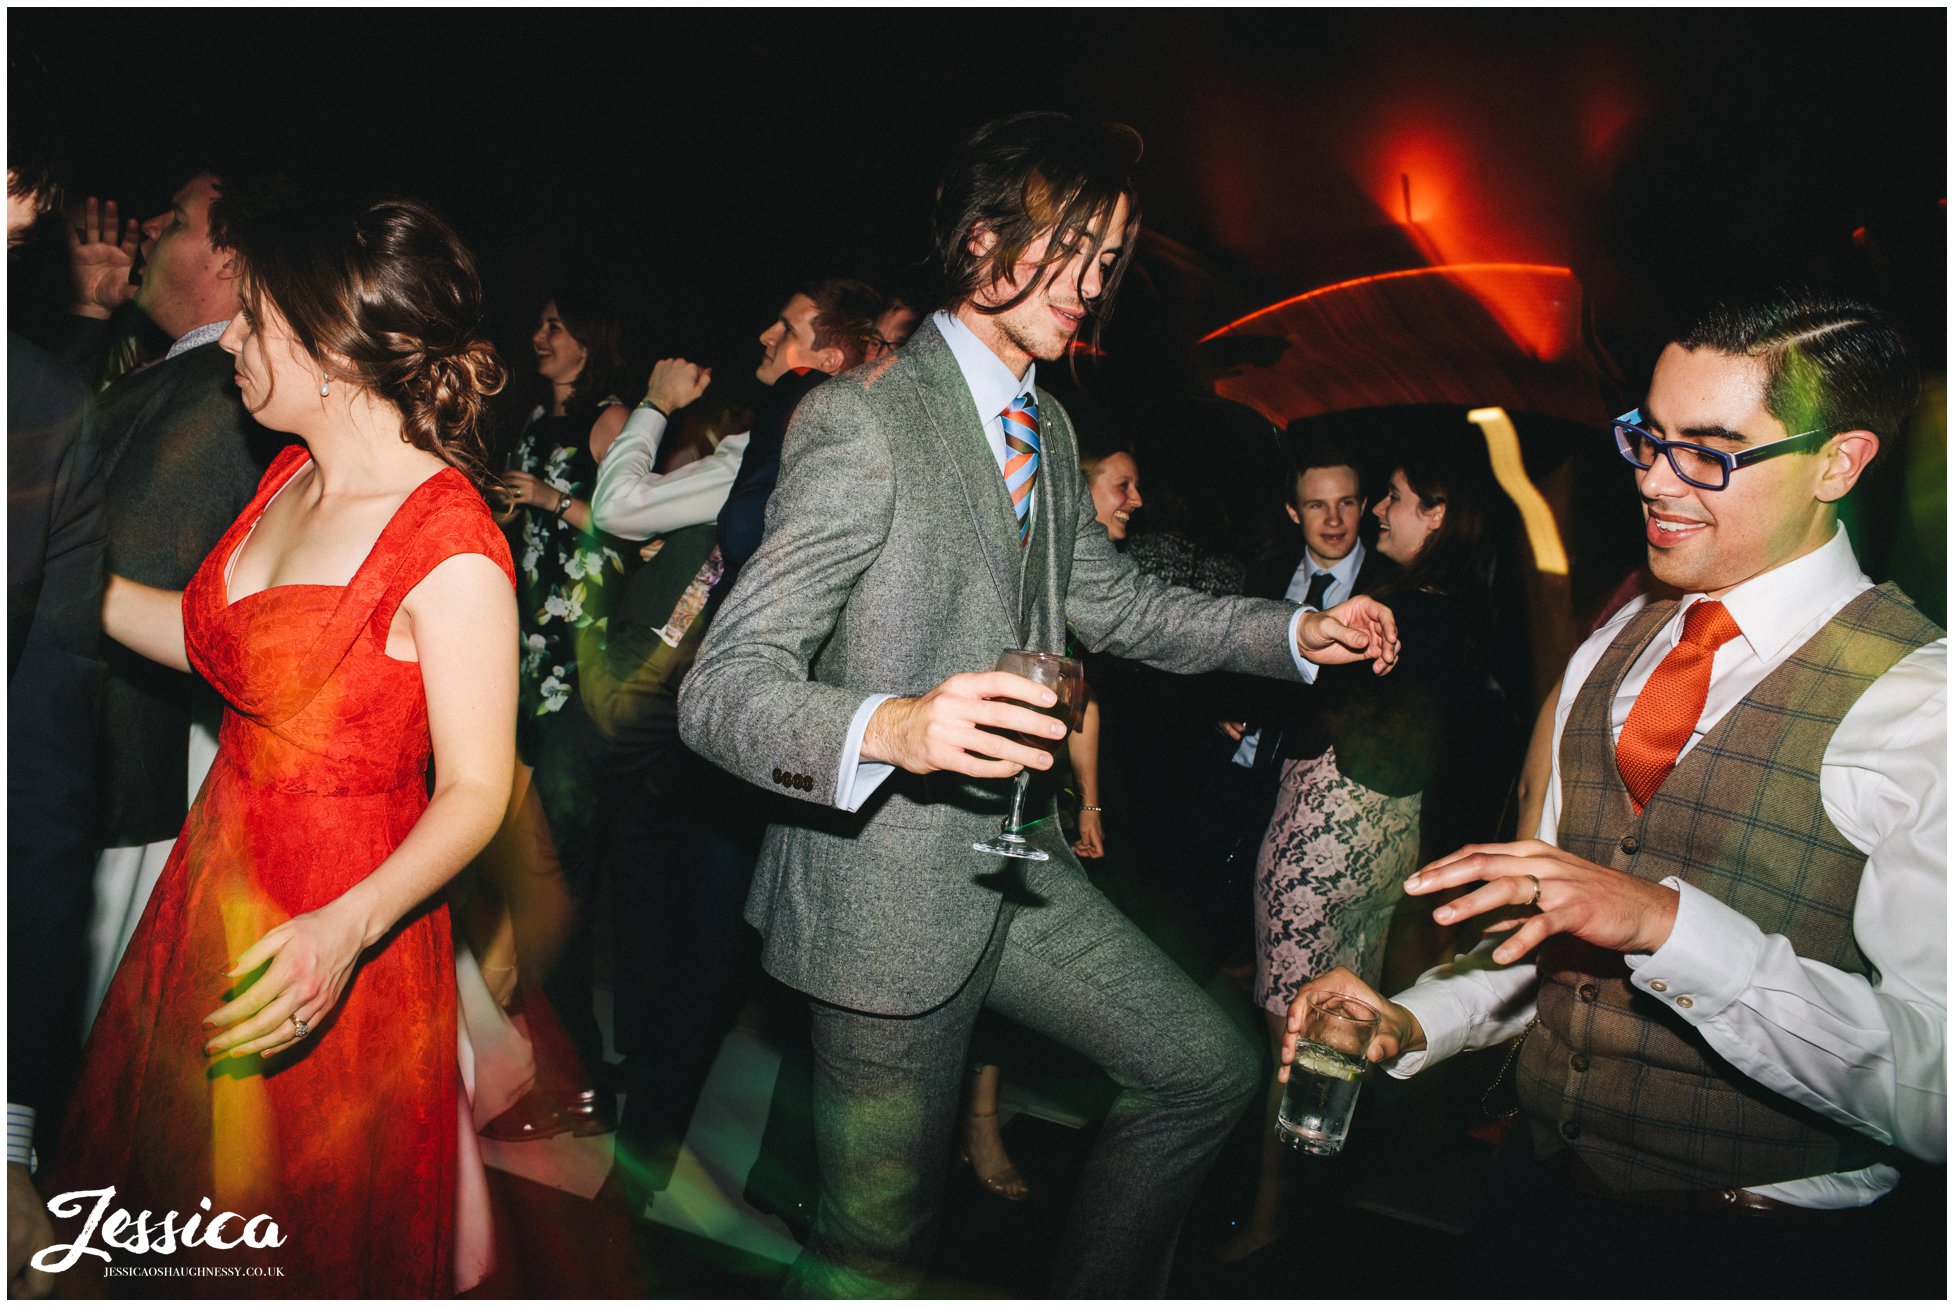 wedding guests do silly dance moves in manchester